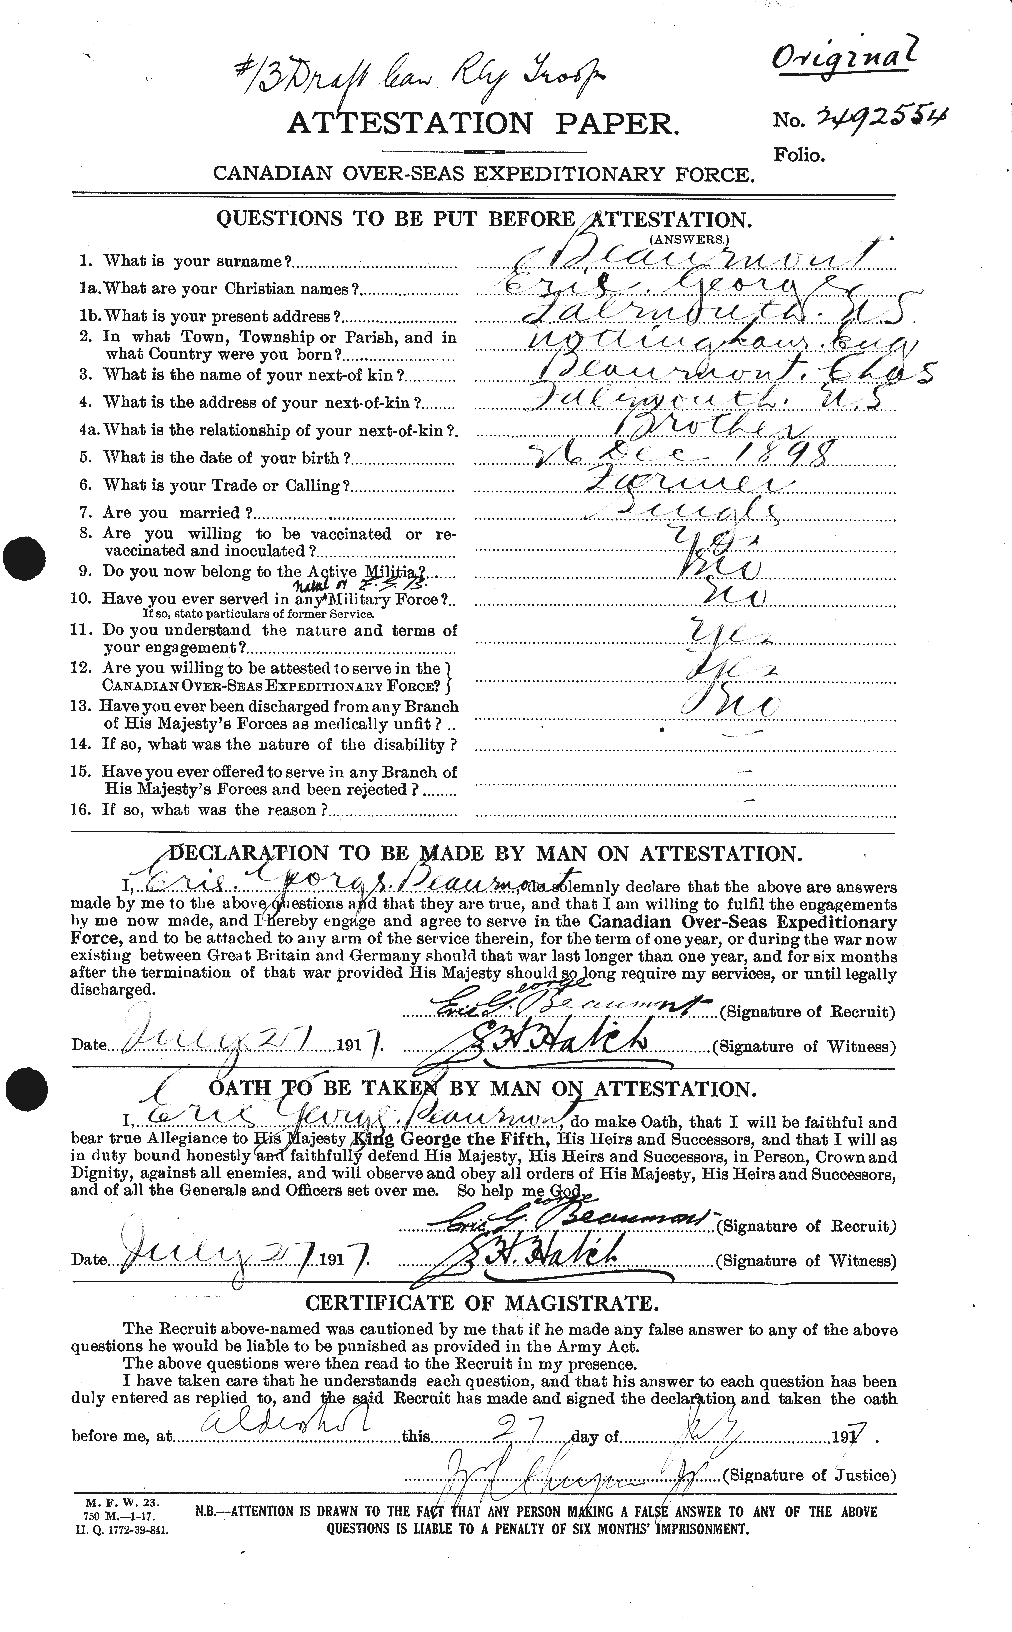 Personnel Records of the First World War - CEF 231655a